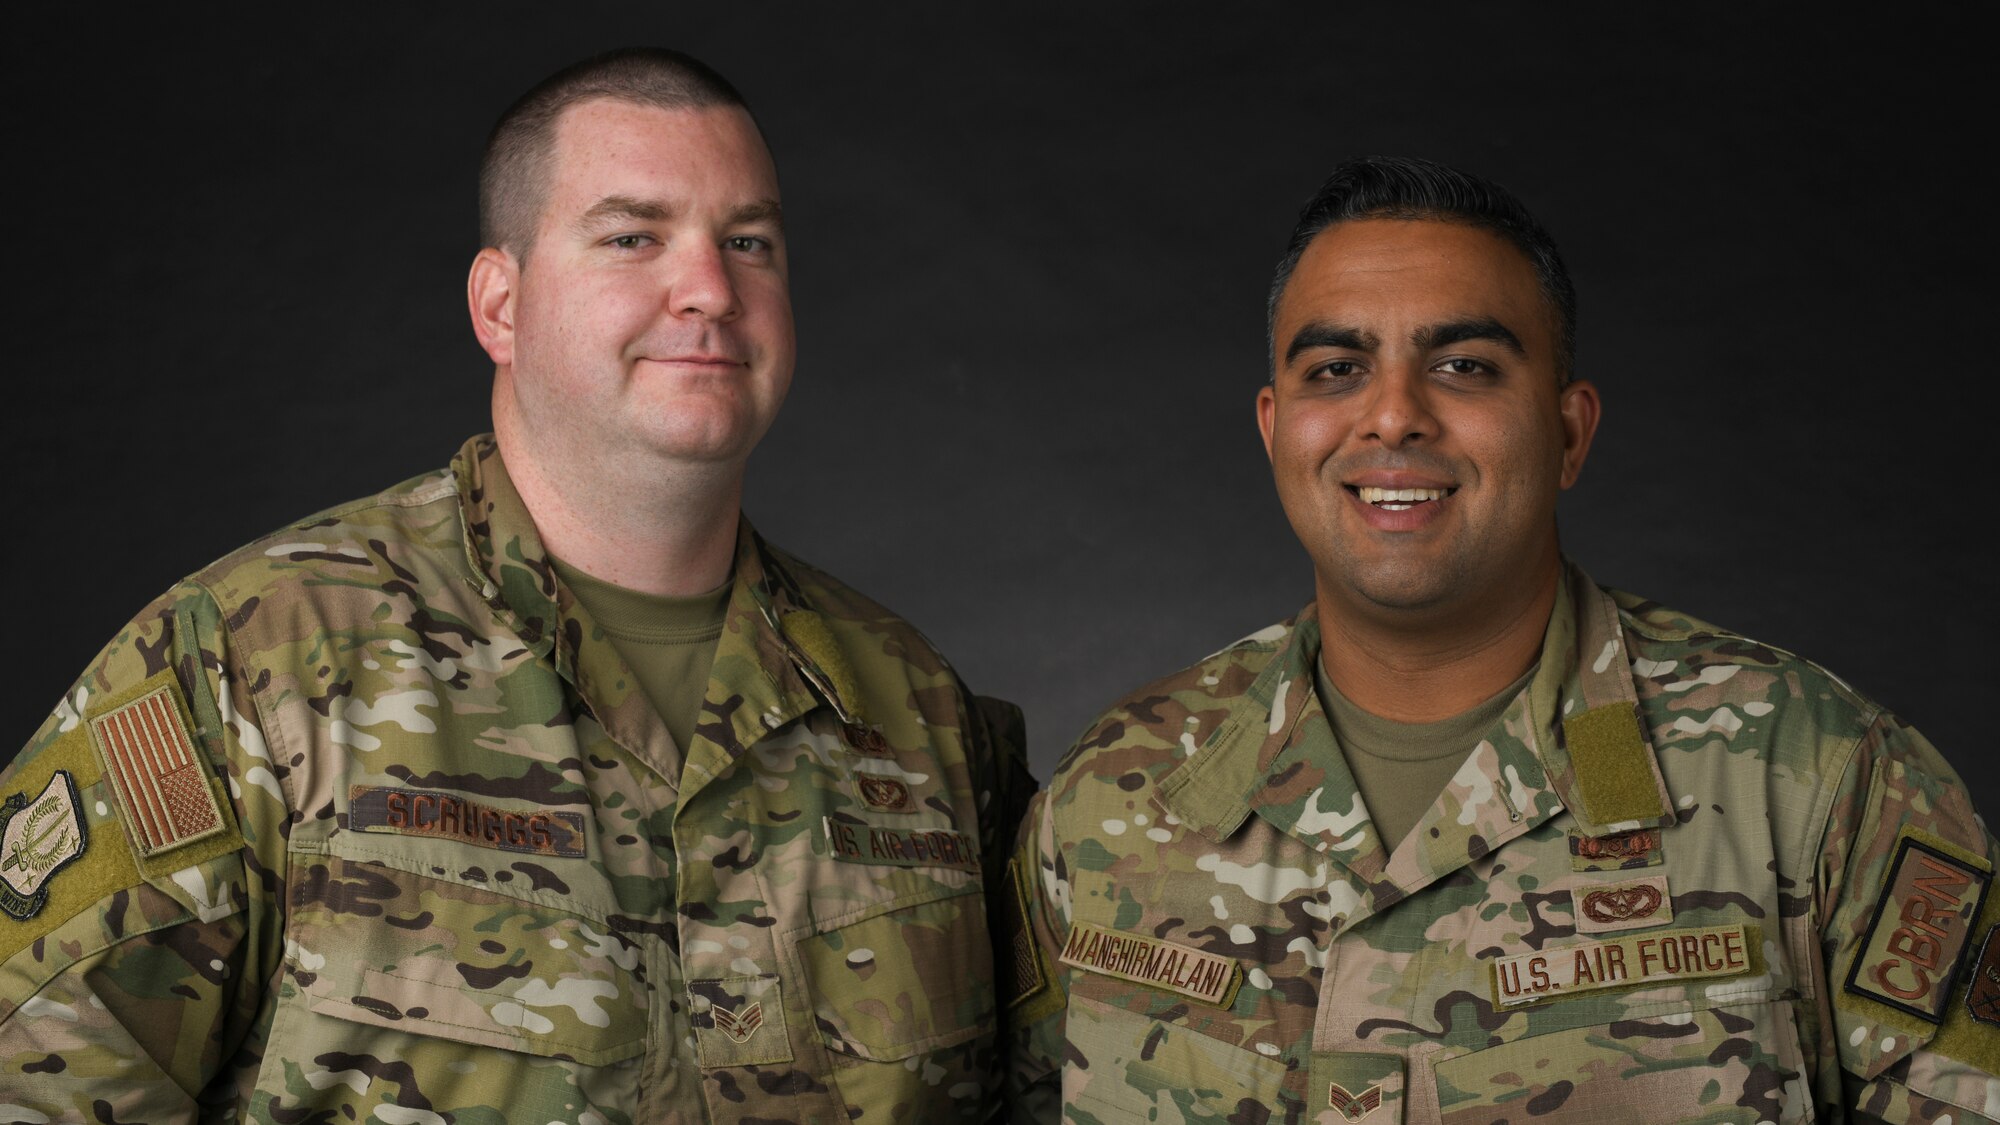 Two uniformed Airmen stand side-by-side and smile for a photo